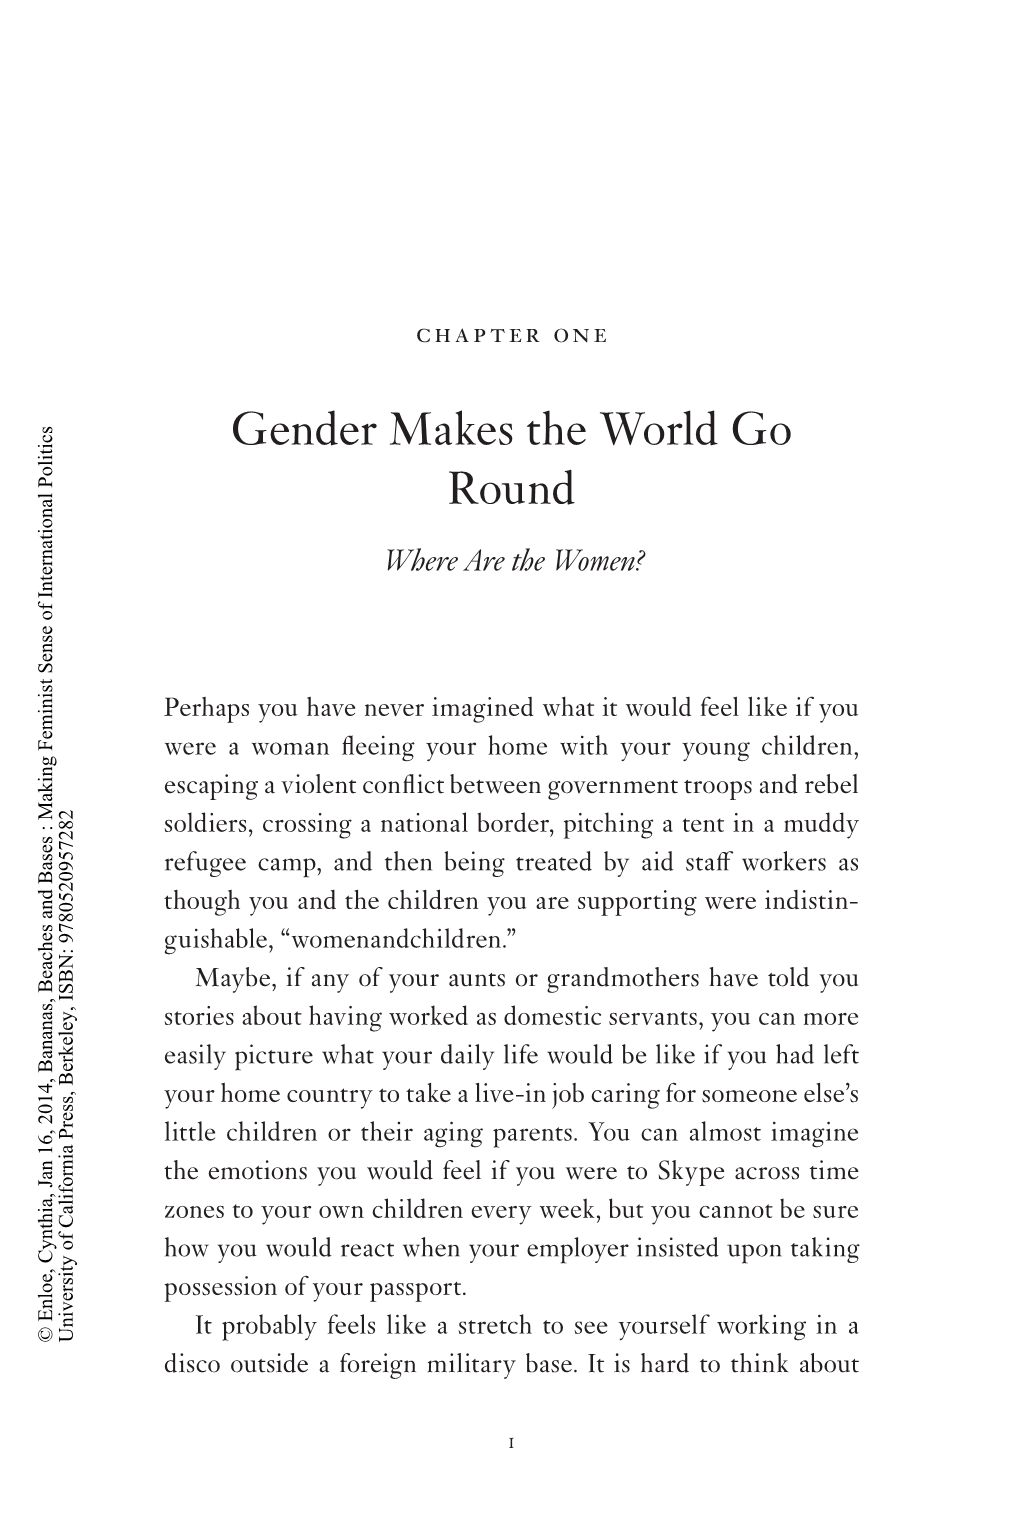 Gender Makes the World Go Round Where Are the Women?